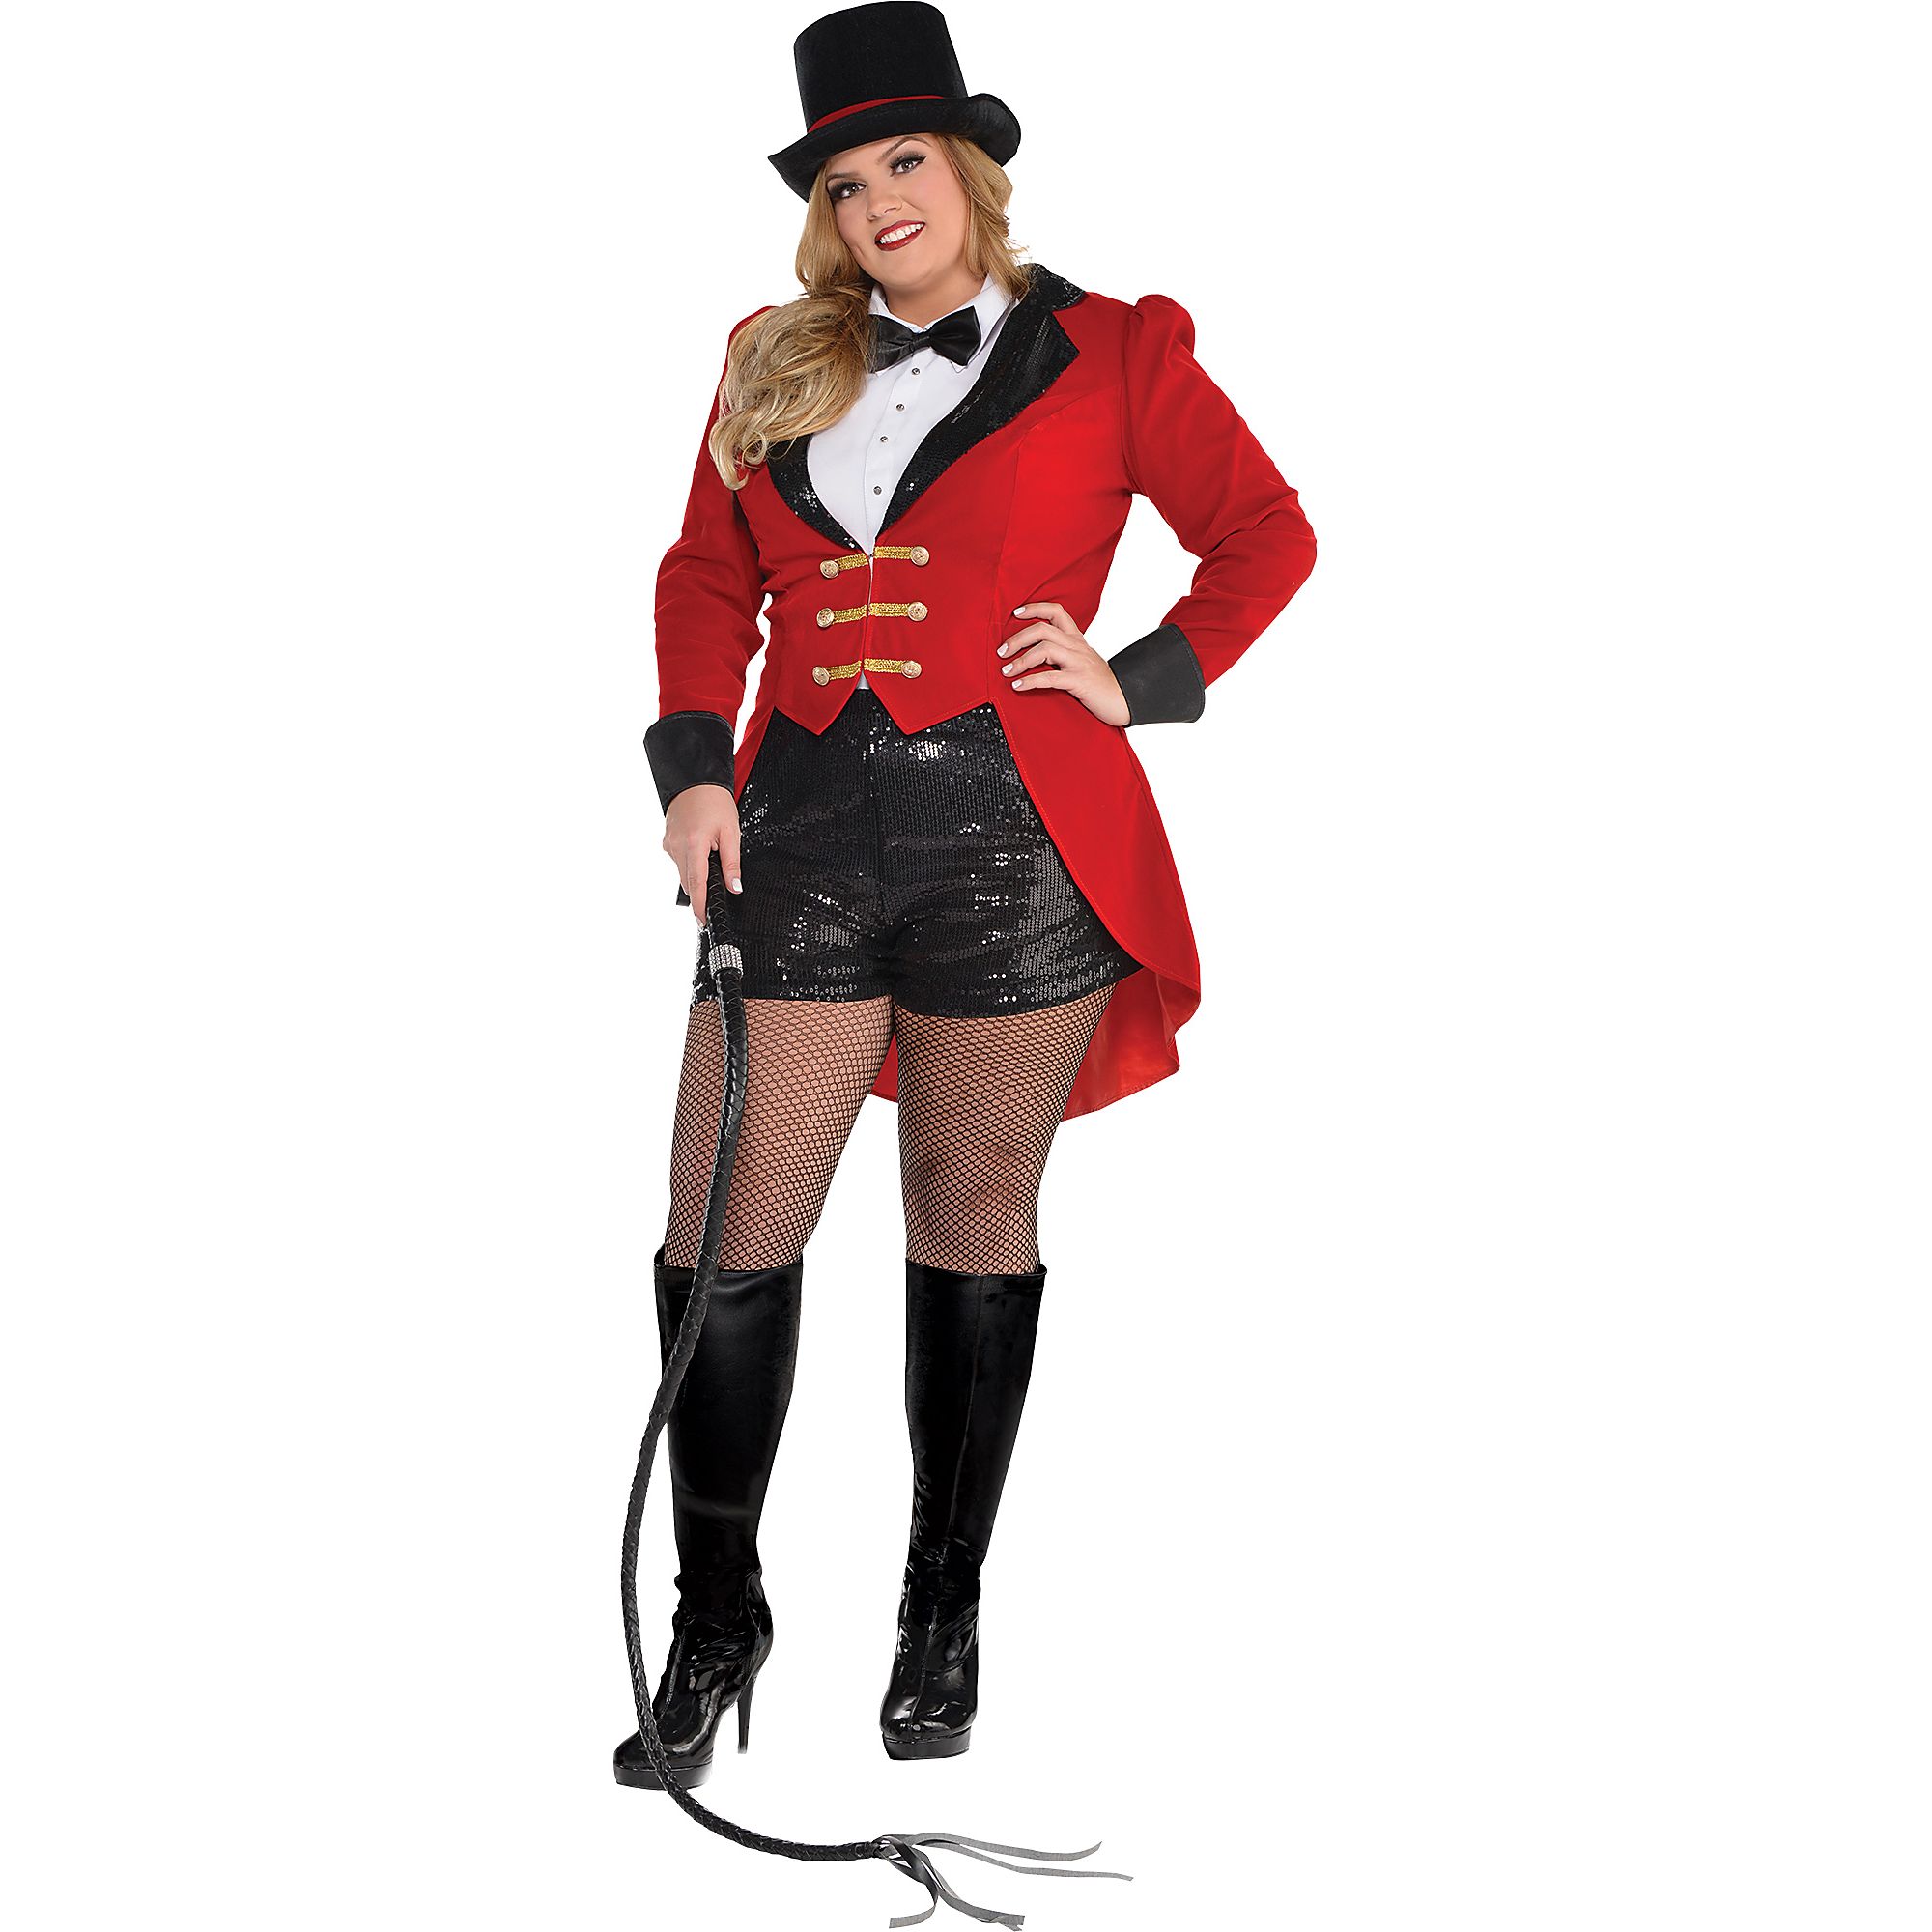 Circus Ringmaster Halloween Costume for Adults, Plus Size, with Jacket 8098...